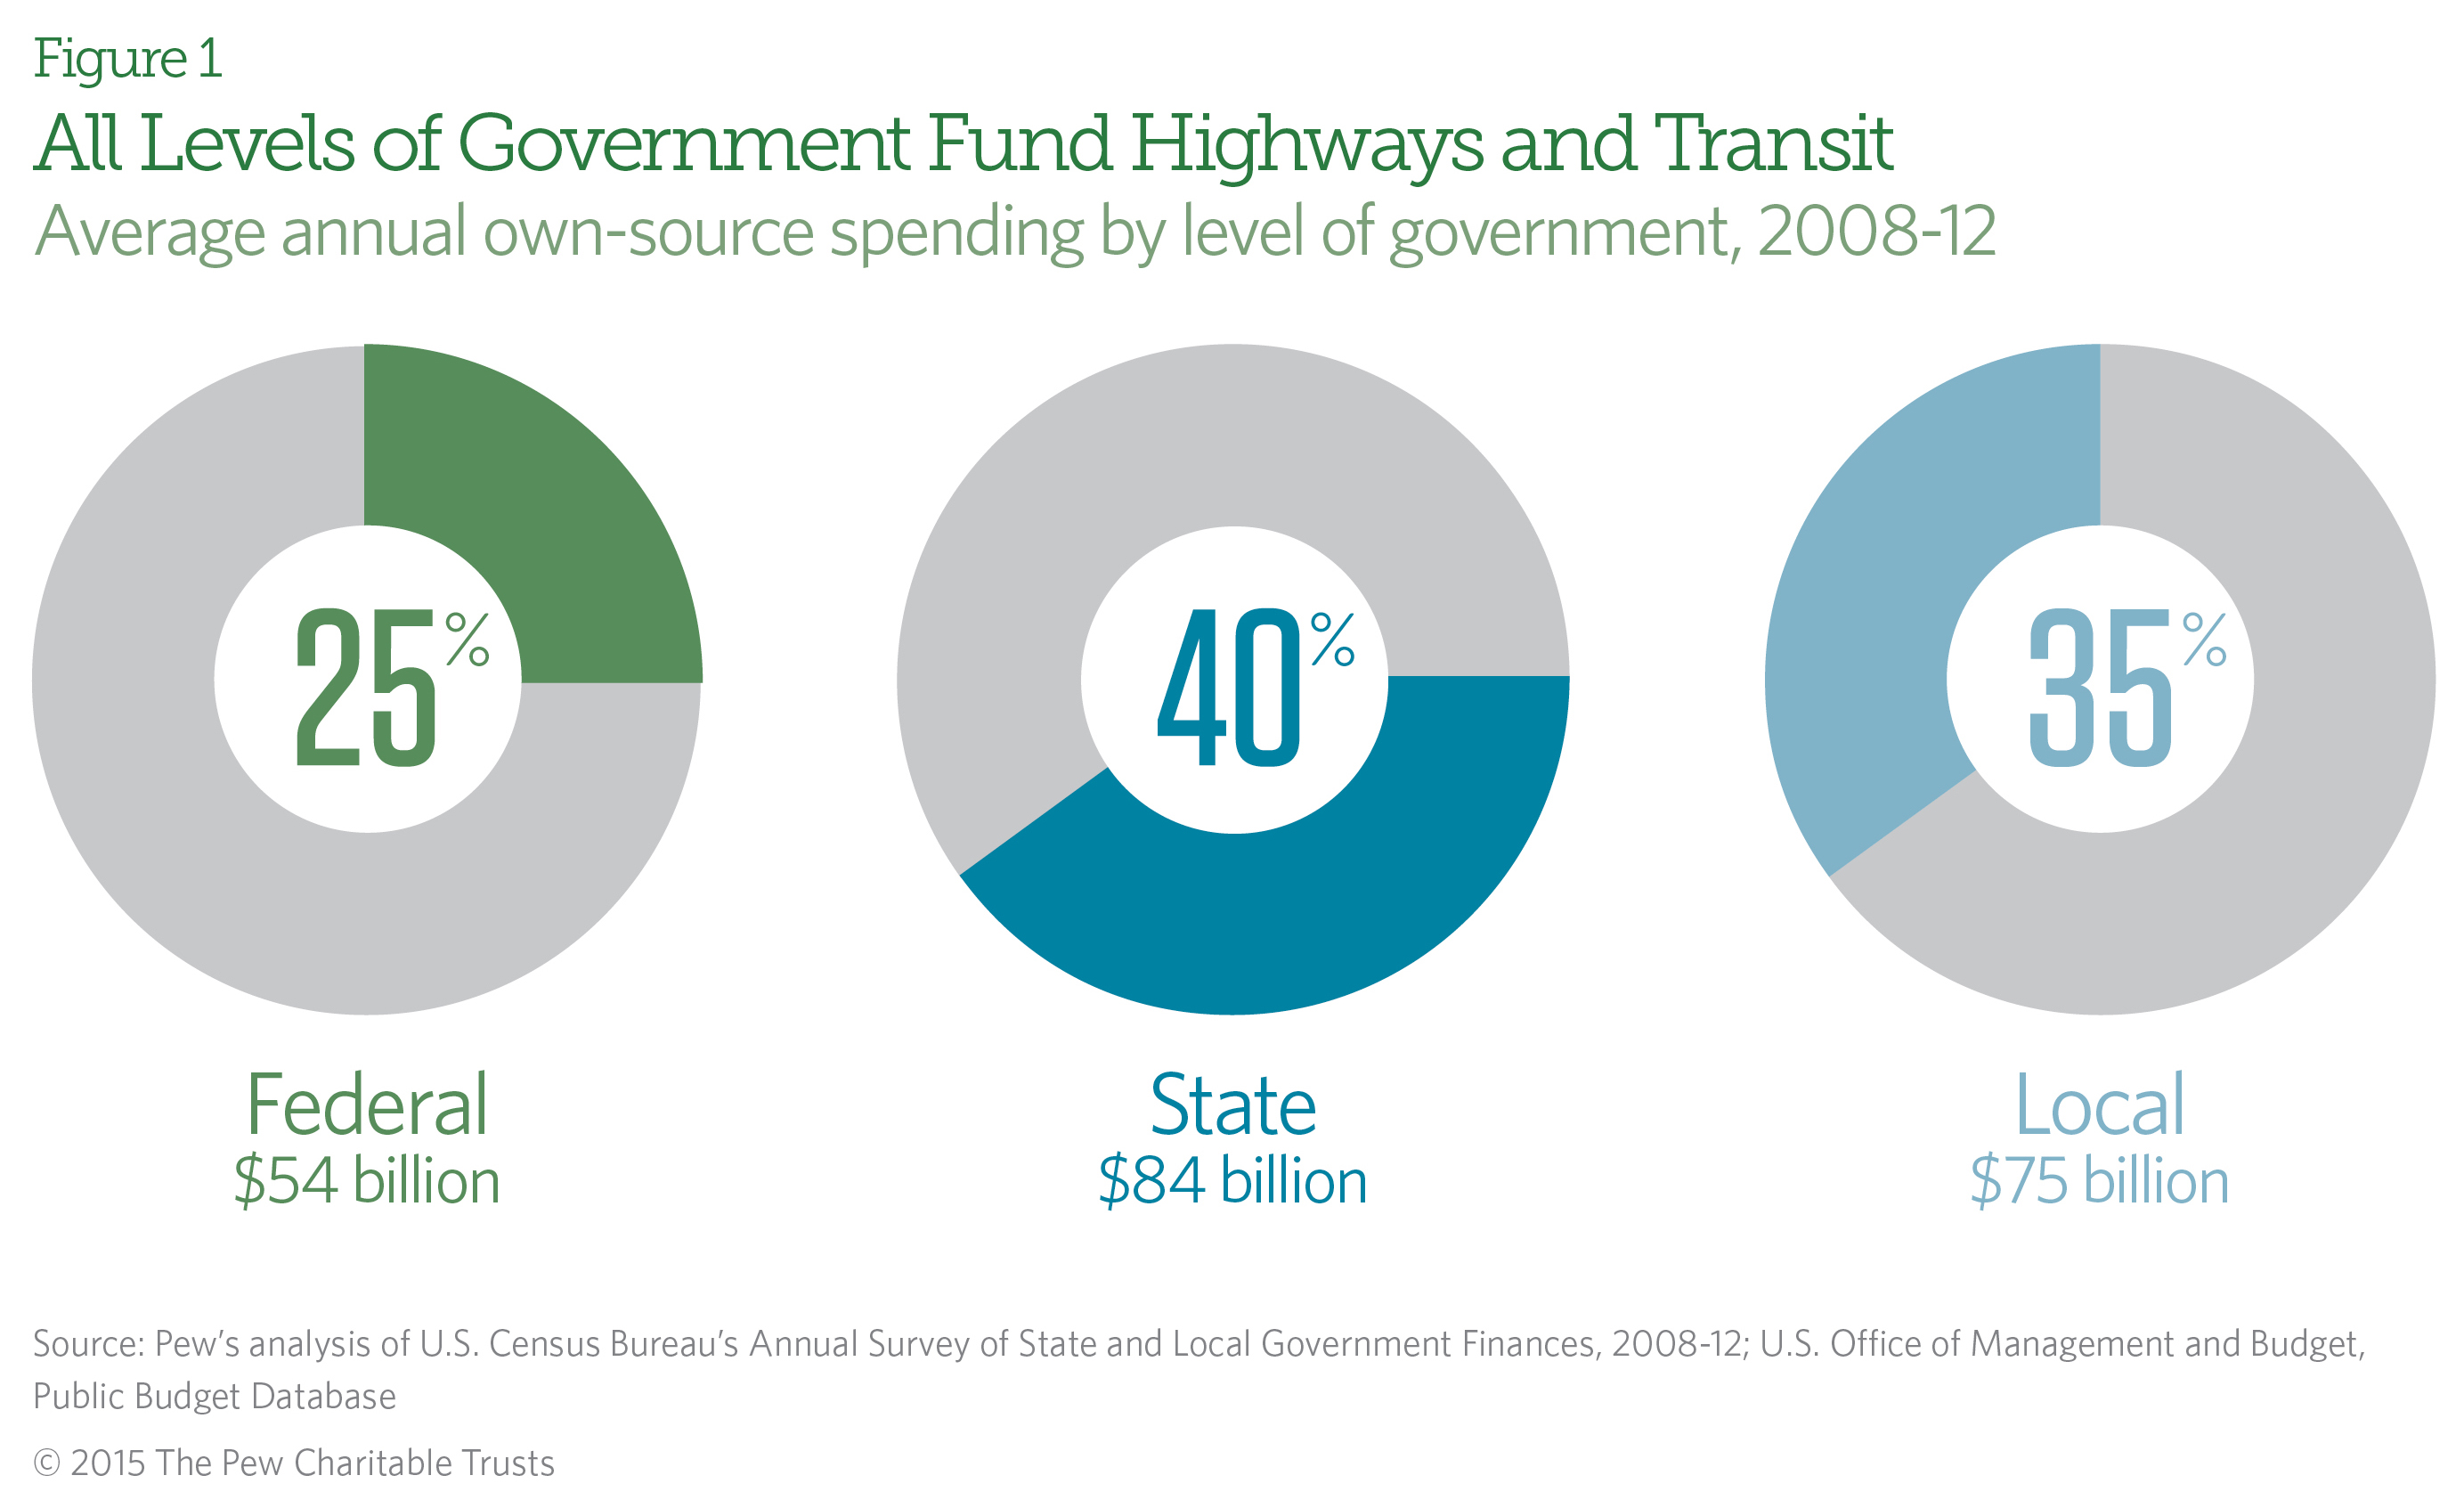 All Levels of Government Fund Highways and Transit